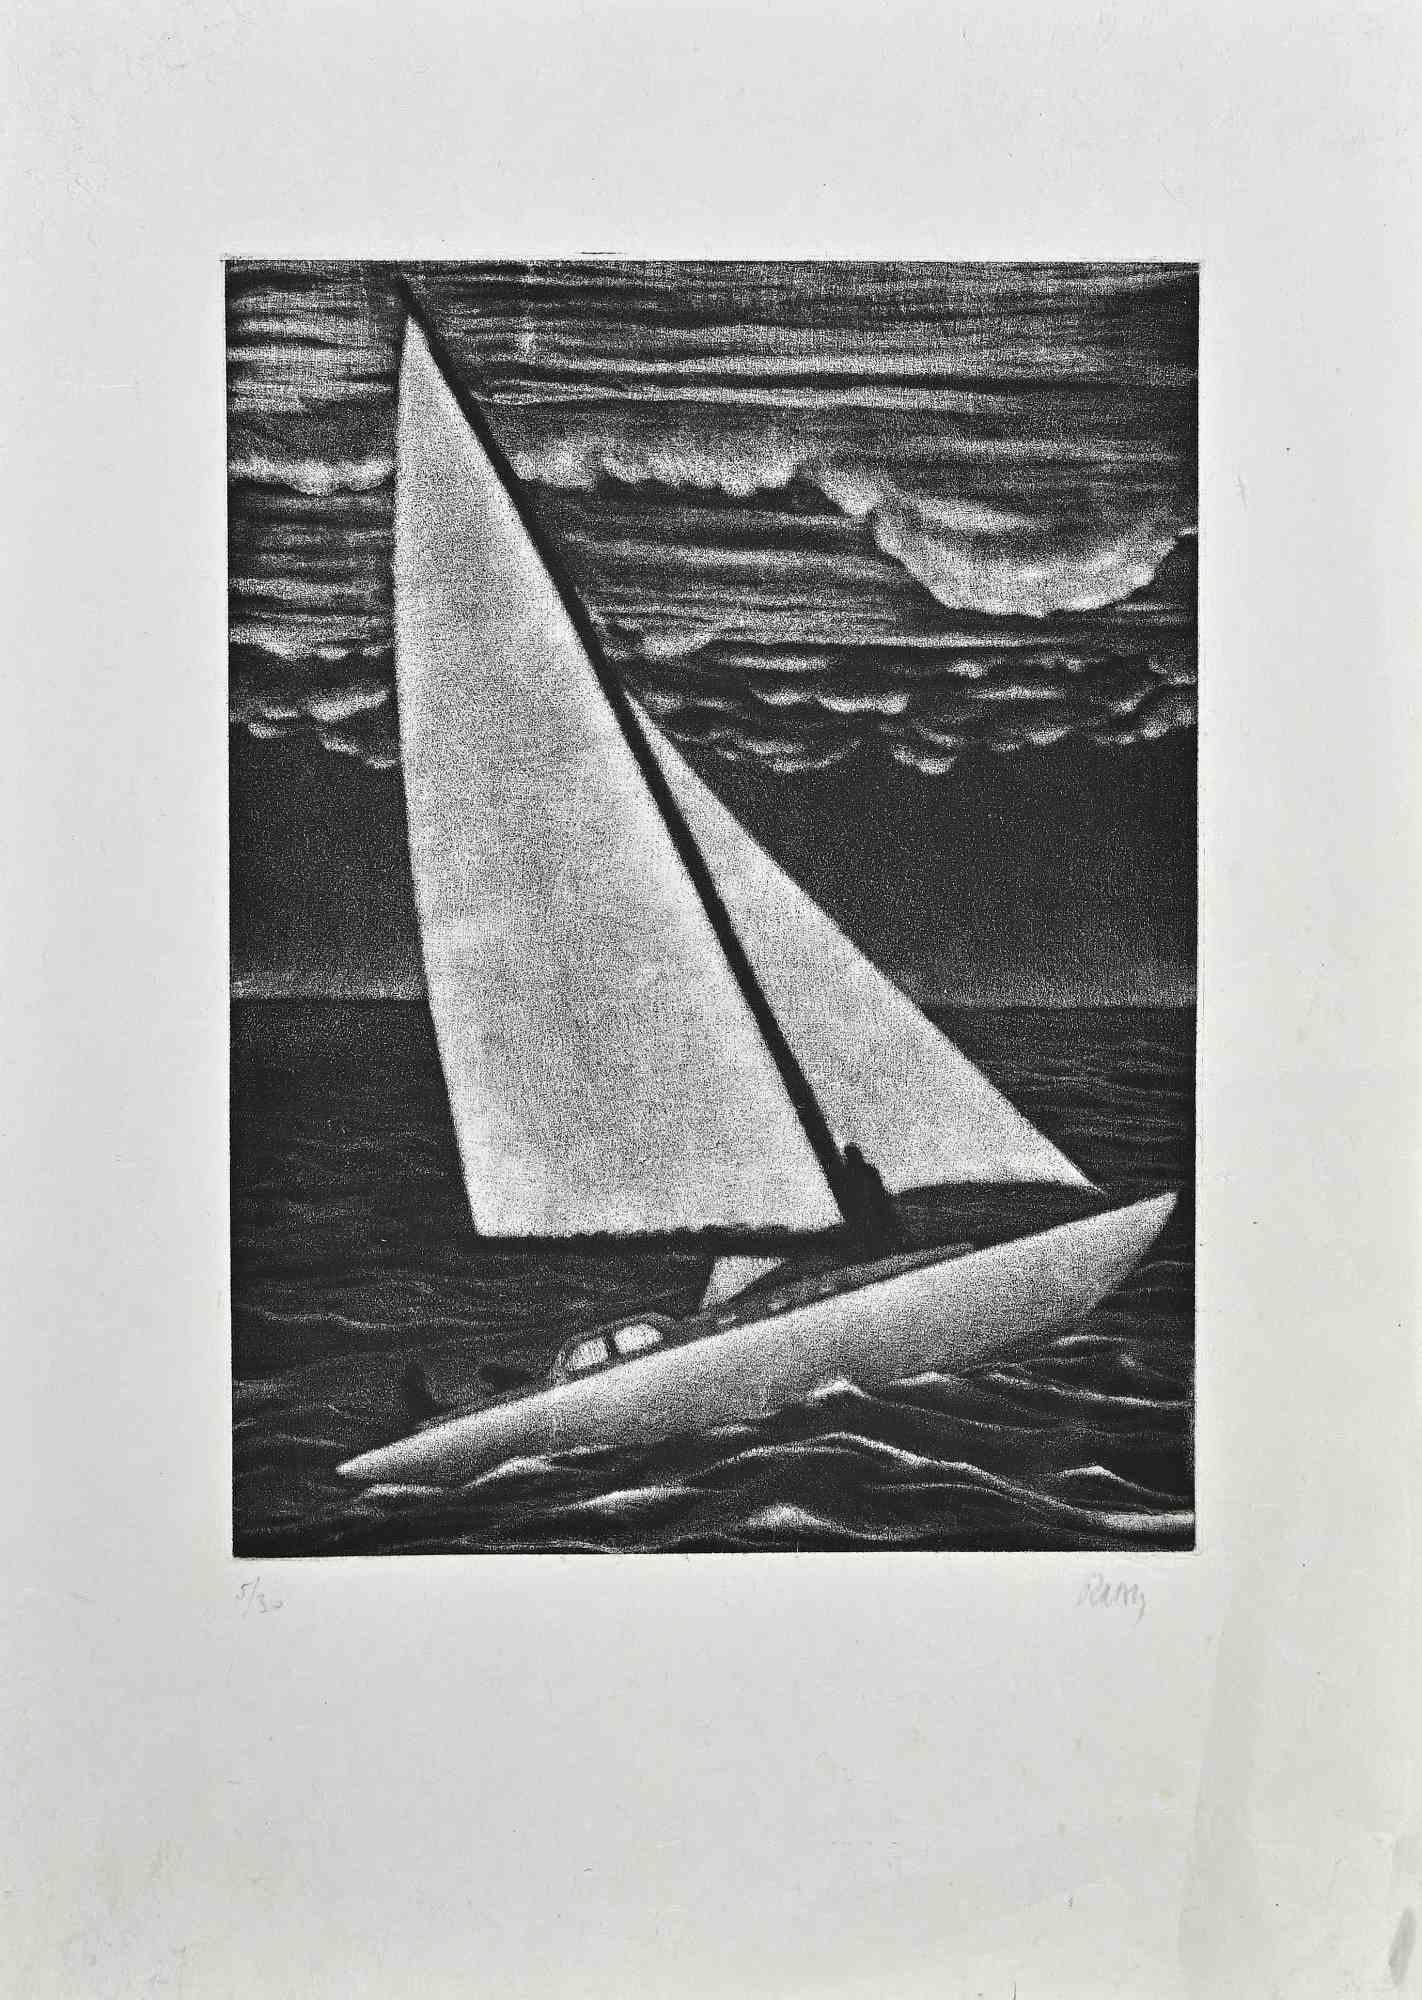 Boat is a Contemporary artwork realized in the half of the 20th Century by Robert Naly (1900 - 1983). 

Mezzotint print.

Hand-signed.

Numbered, edition of 50 prints.

Good conditions except for consumed margins.